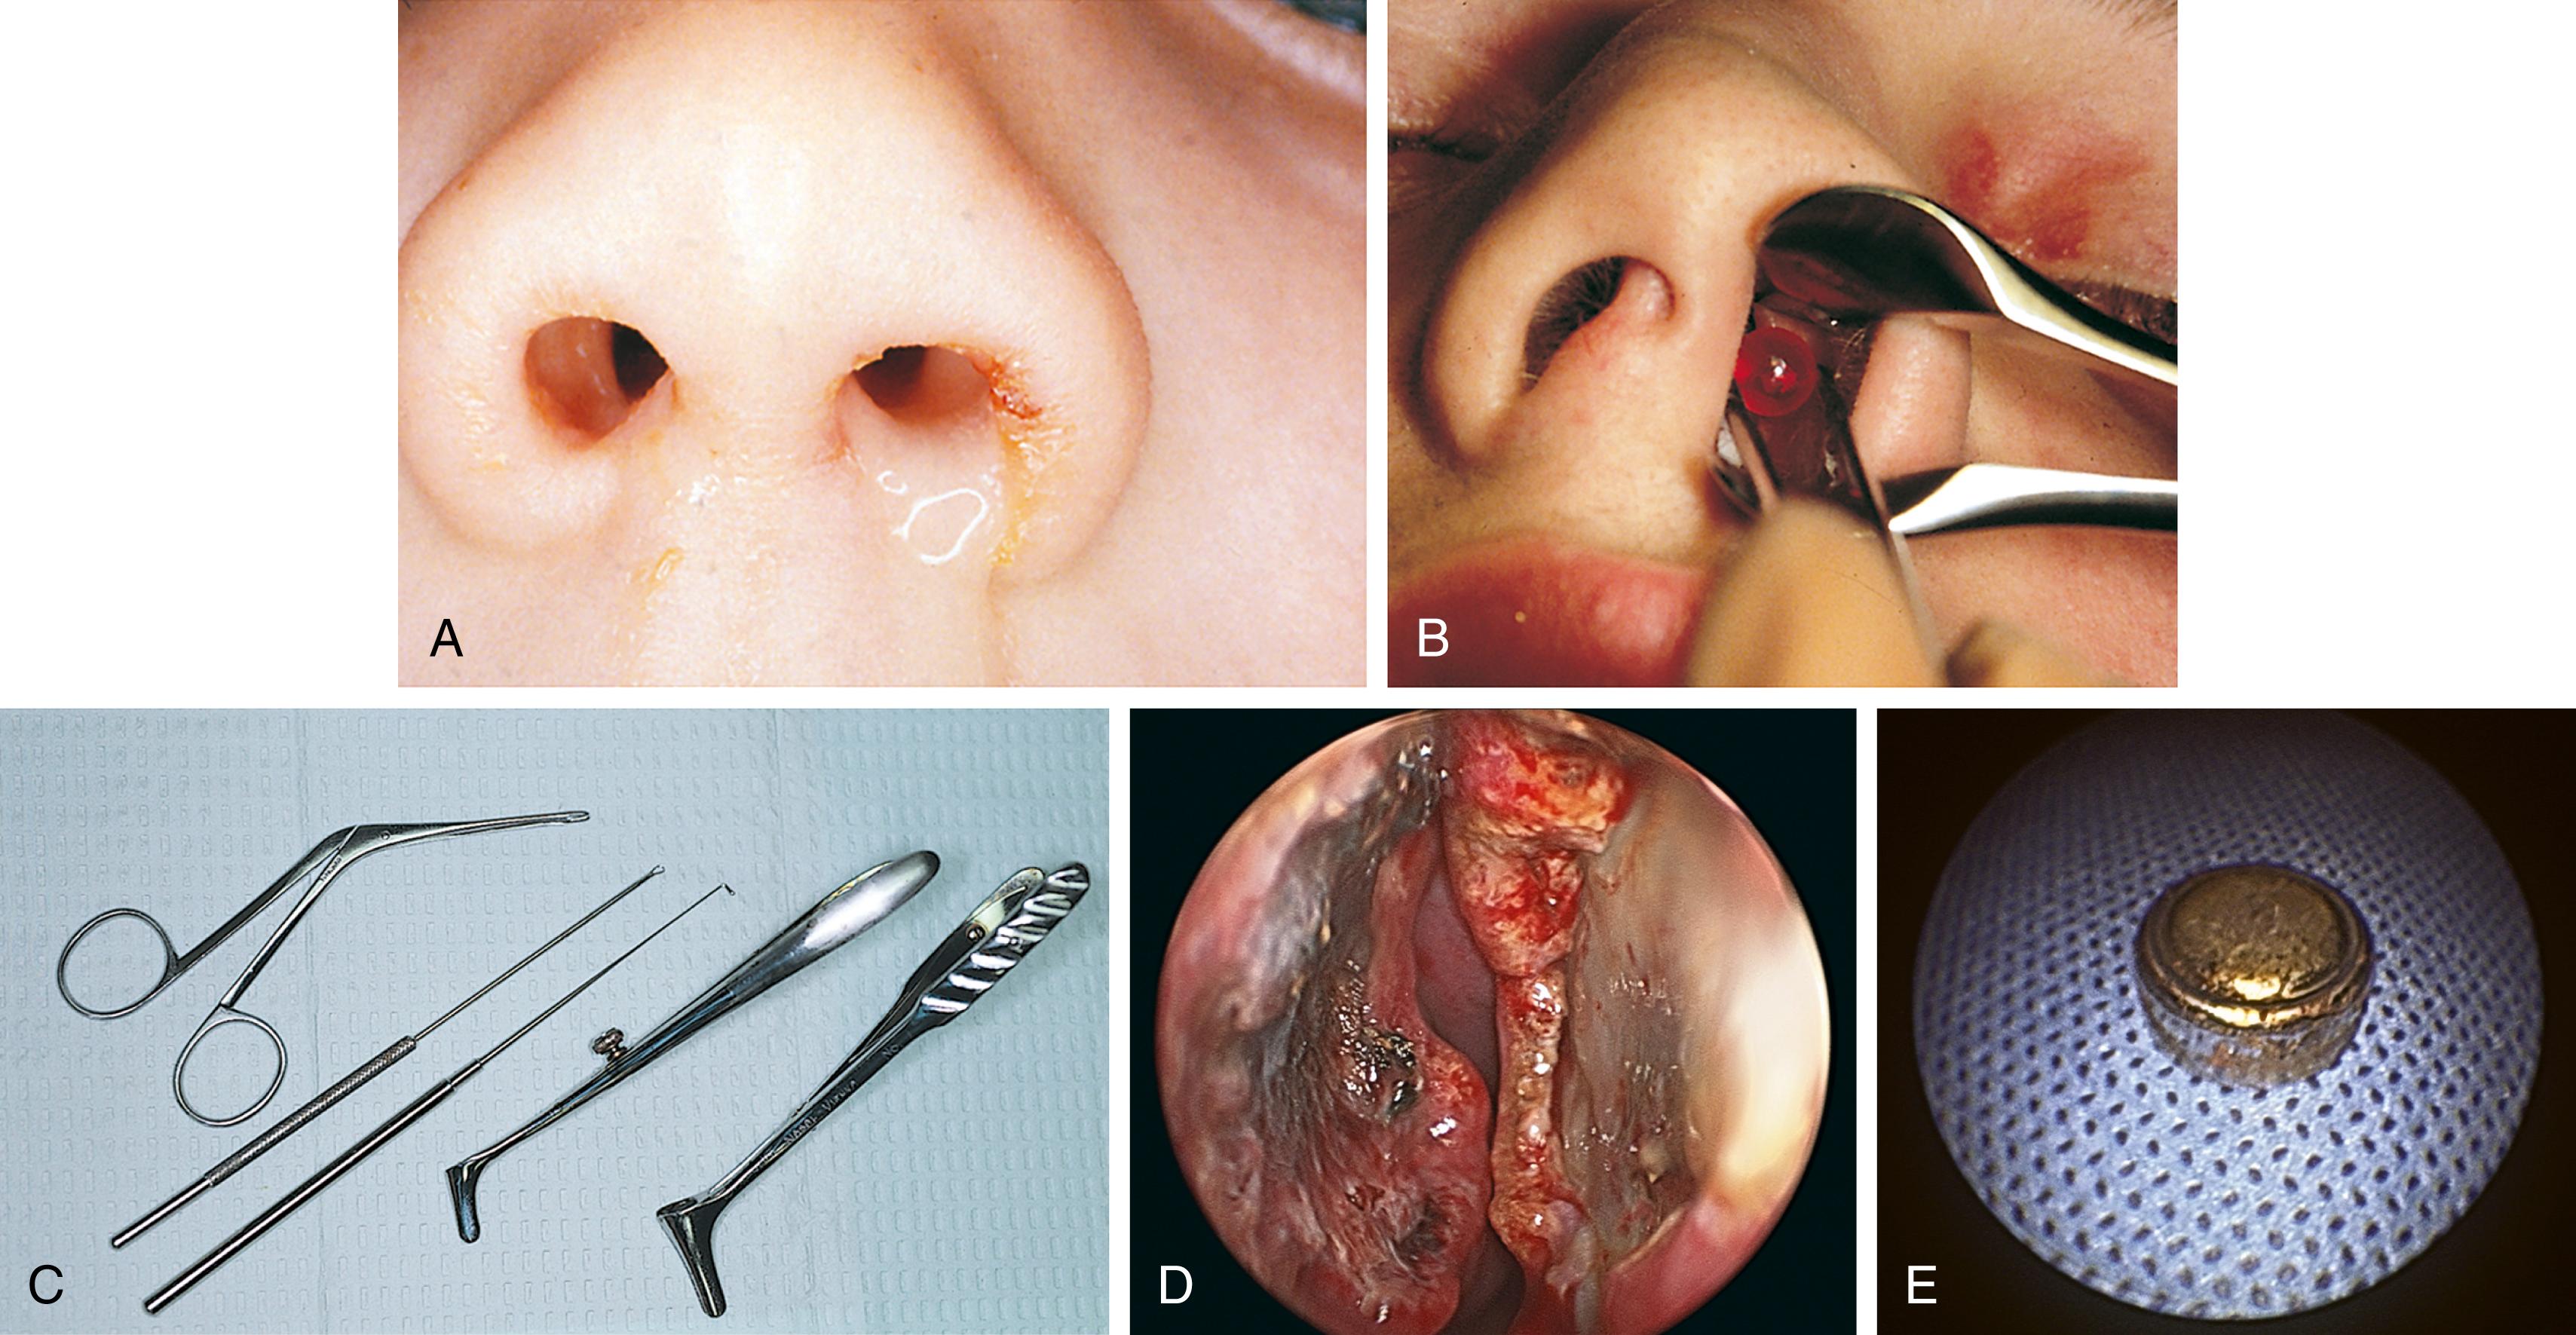 Fig. 24.41, Nasal foreign body. (A) This child had a unilateral, foul-smelling nasal discharge. (B) Aspiration of the discharge in this patient revealed a red bead that was removed with a Day hook. (C) Hartmann forceps, a small wire loop curette, and a right-angle Day hook are the instruments used most commonly for removal of nasal foreign bodies. Nasal spreaders assist visualization and create a wider space for inserting the desired instrument. Note that bleeding or aspiration of the nasal foreign body may occur, especially with uncooperative toddlers. Thus consideration should be given for removal of nasal foreign bodies in the operating room with general anesthesia and a controlled airway. (D) Severe intranasal damage resulting from a nasal foreign body—a tiny watch battery. (E) The watch battery removed.